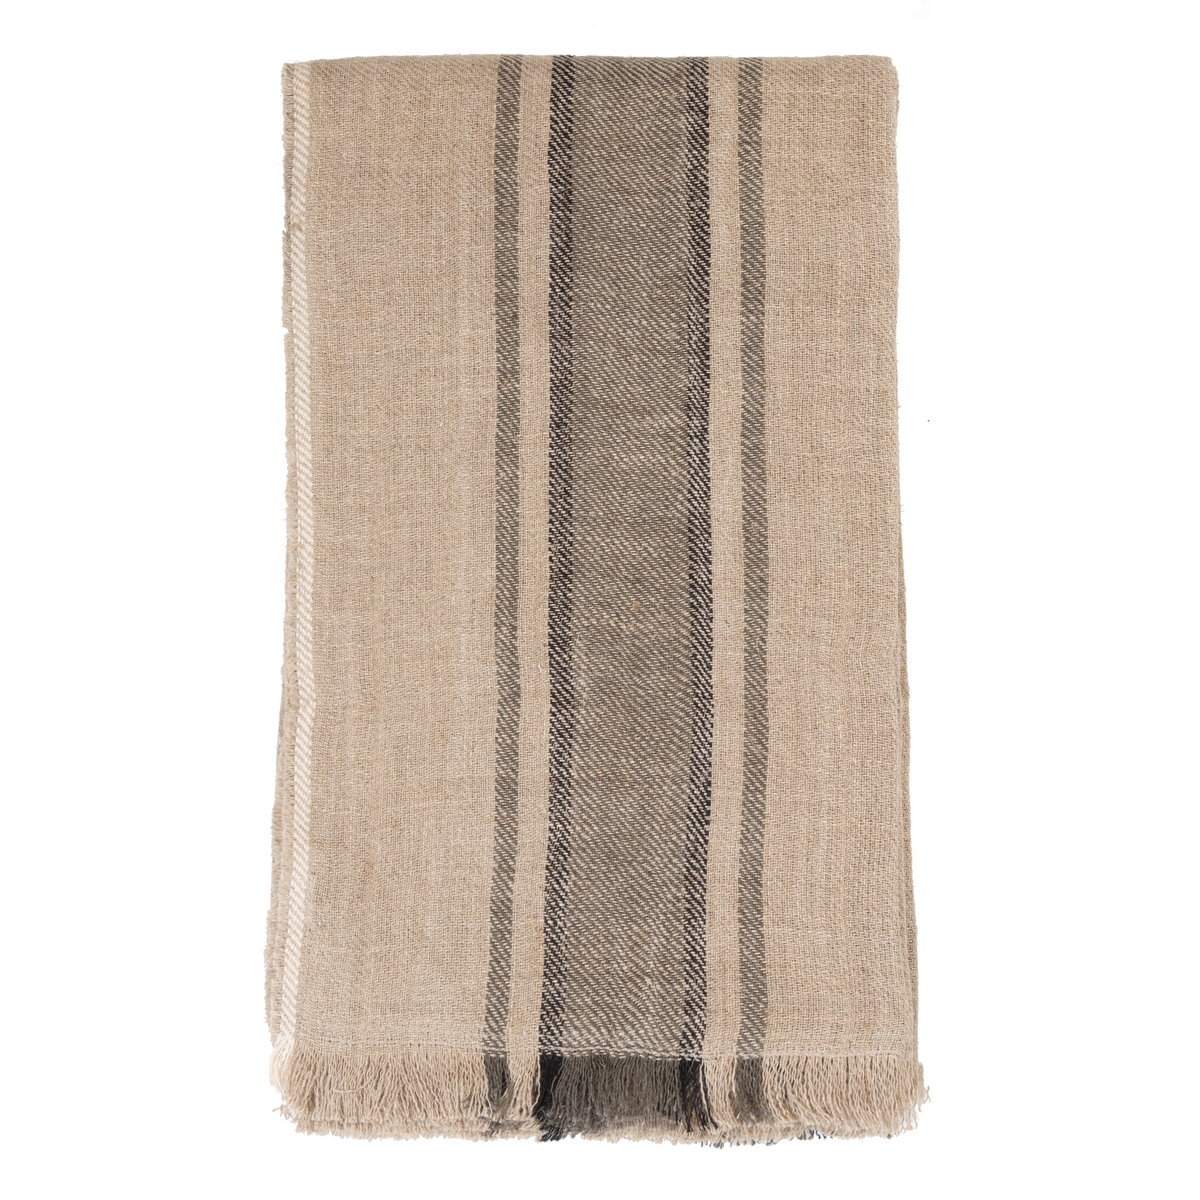 Introduce organic warmth into your space with the Linen Stripe Throw.